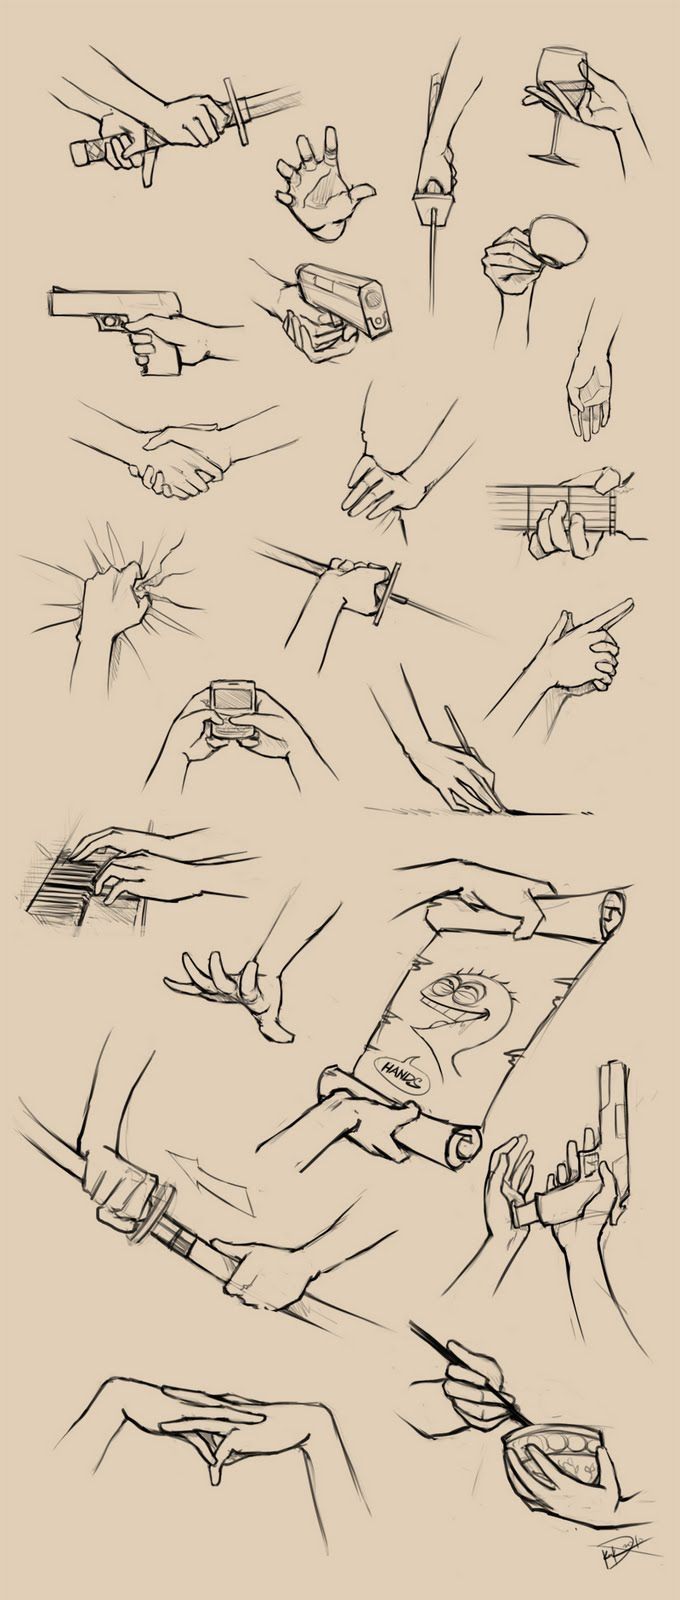 How to draw hands gripping bunch of things. I love how cheese from fosters home for imaginary friends is there